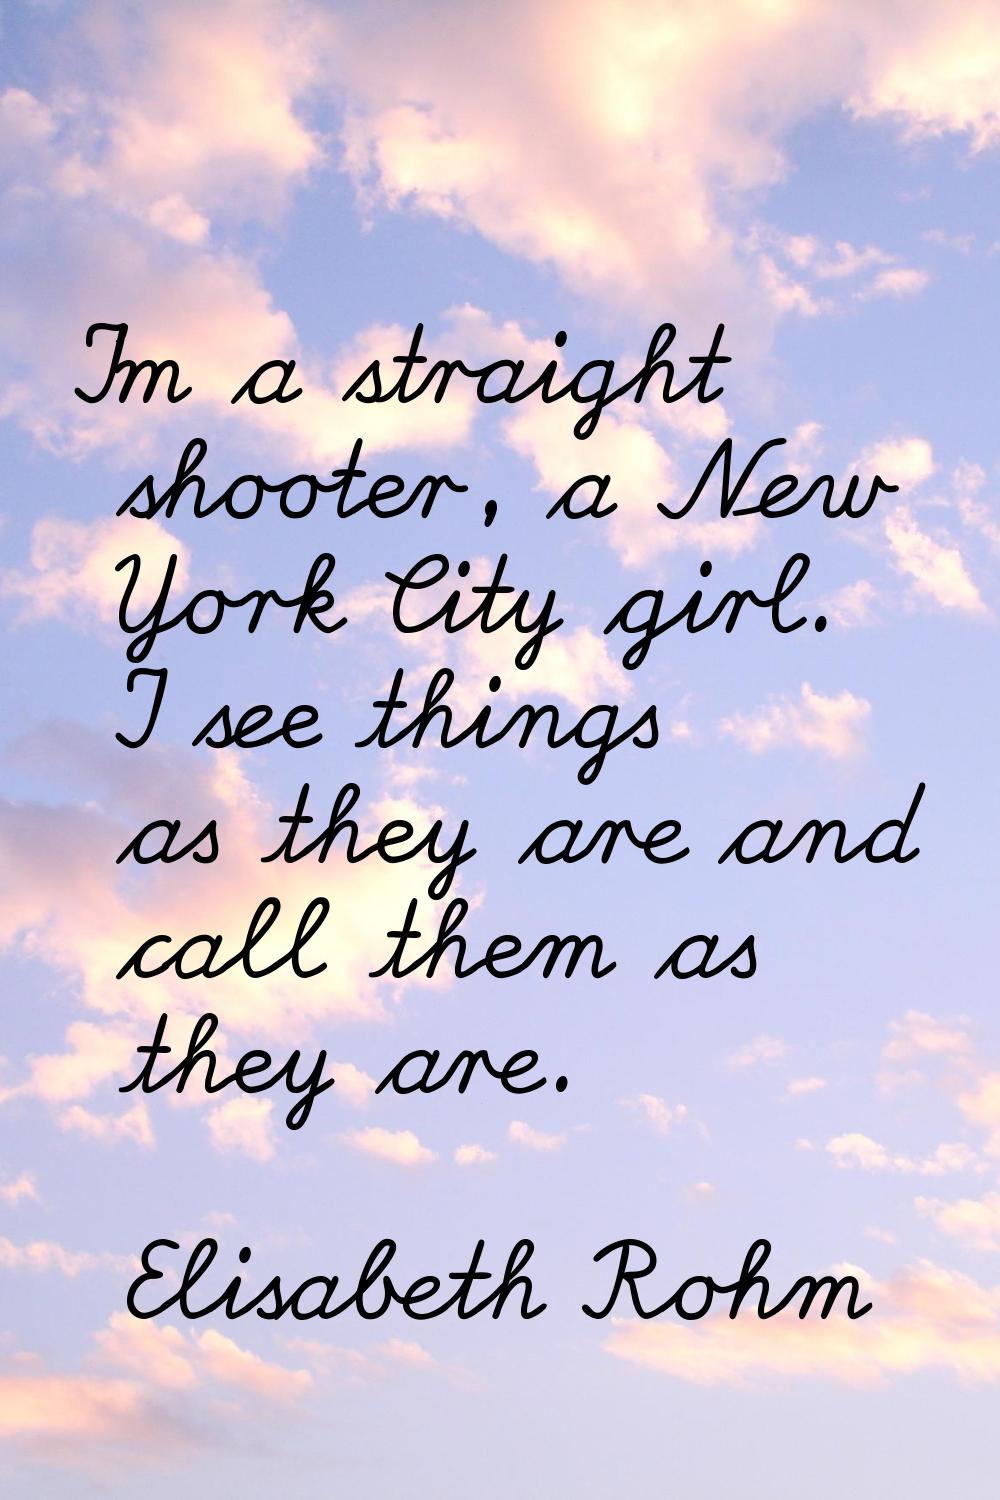 I'm a straight shooter, a New York City girl. I see things as they are and call them as they are.